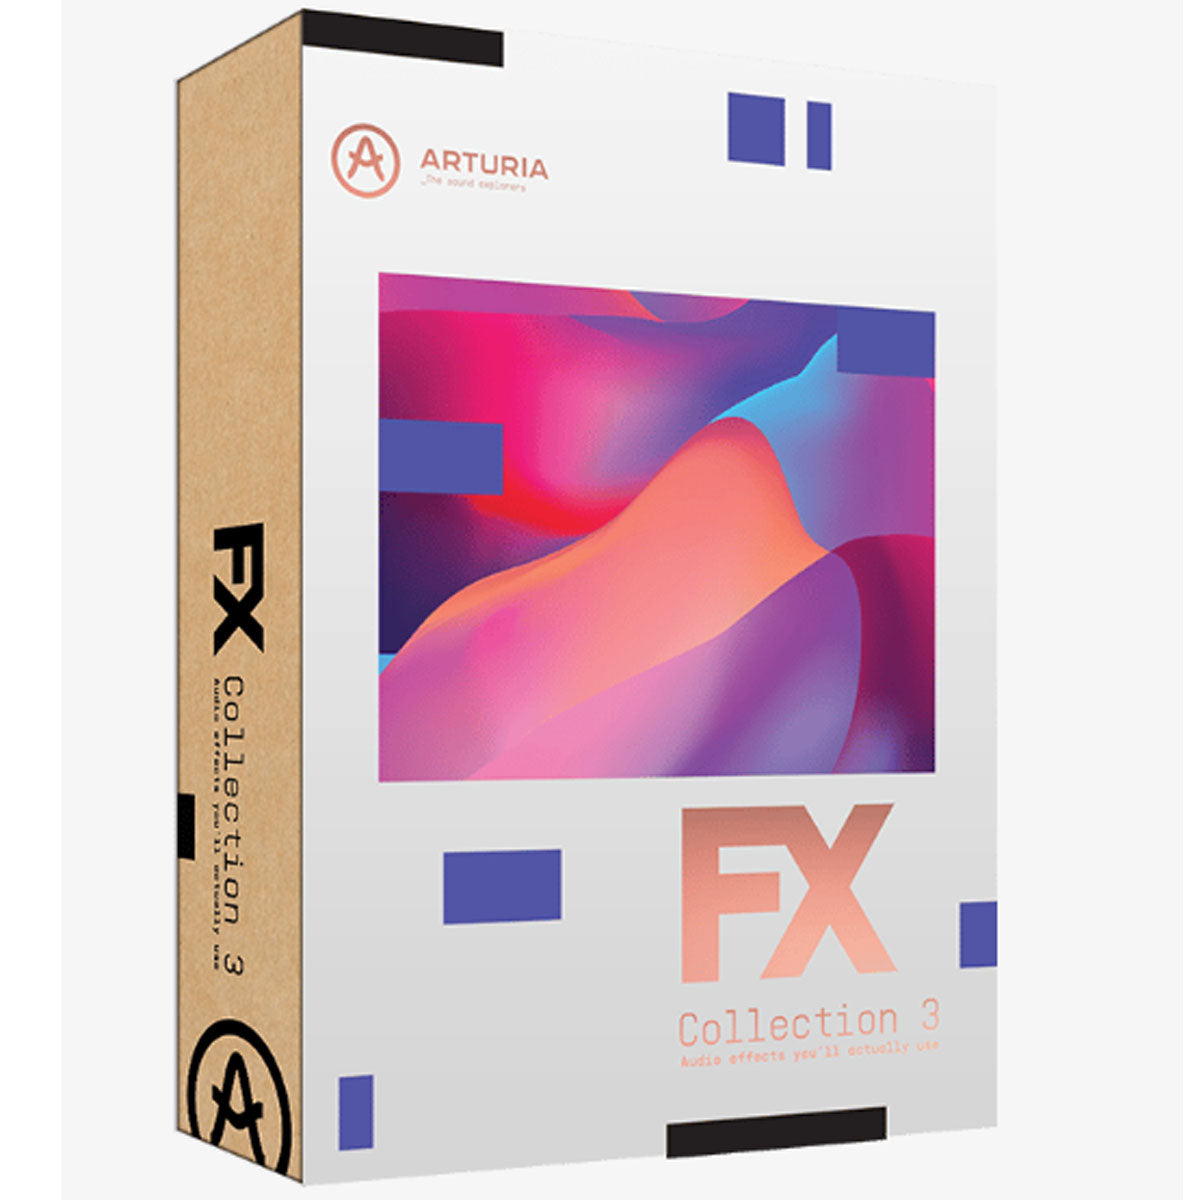 Arturia FX Collection 3 Software - Serial Only (NO BOX)